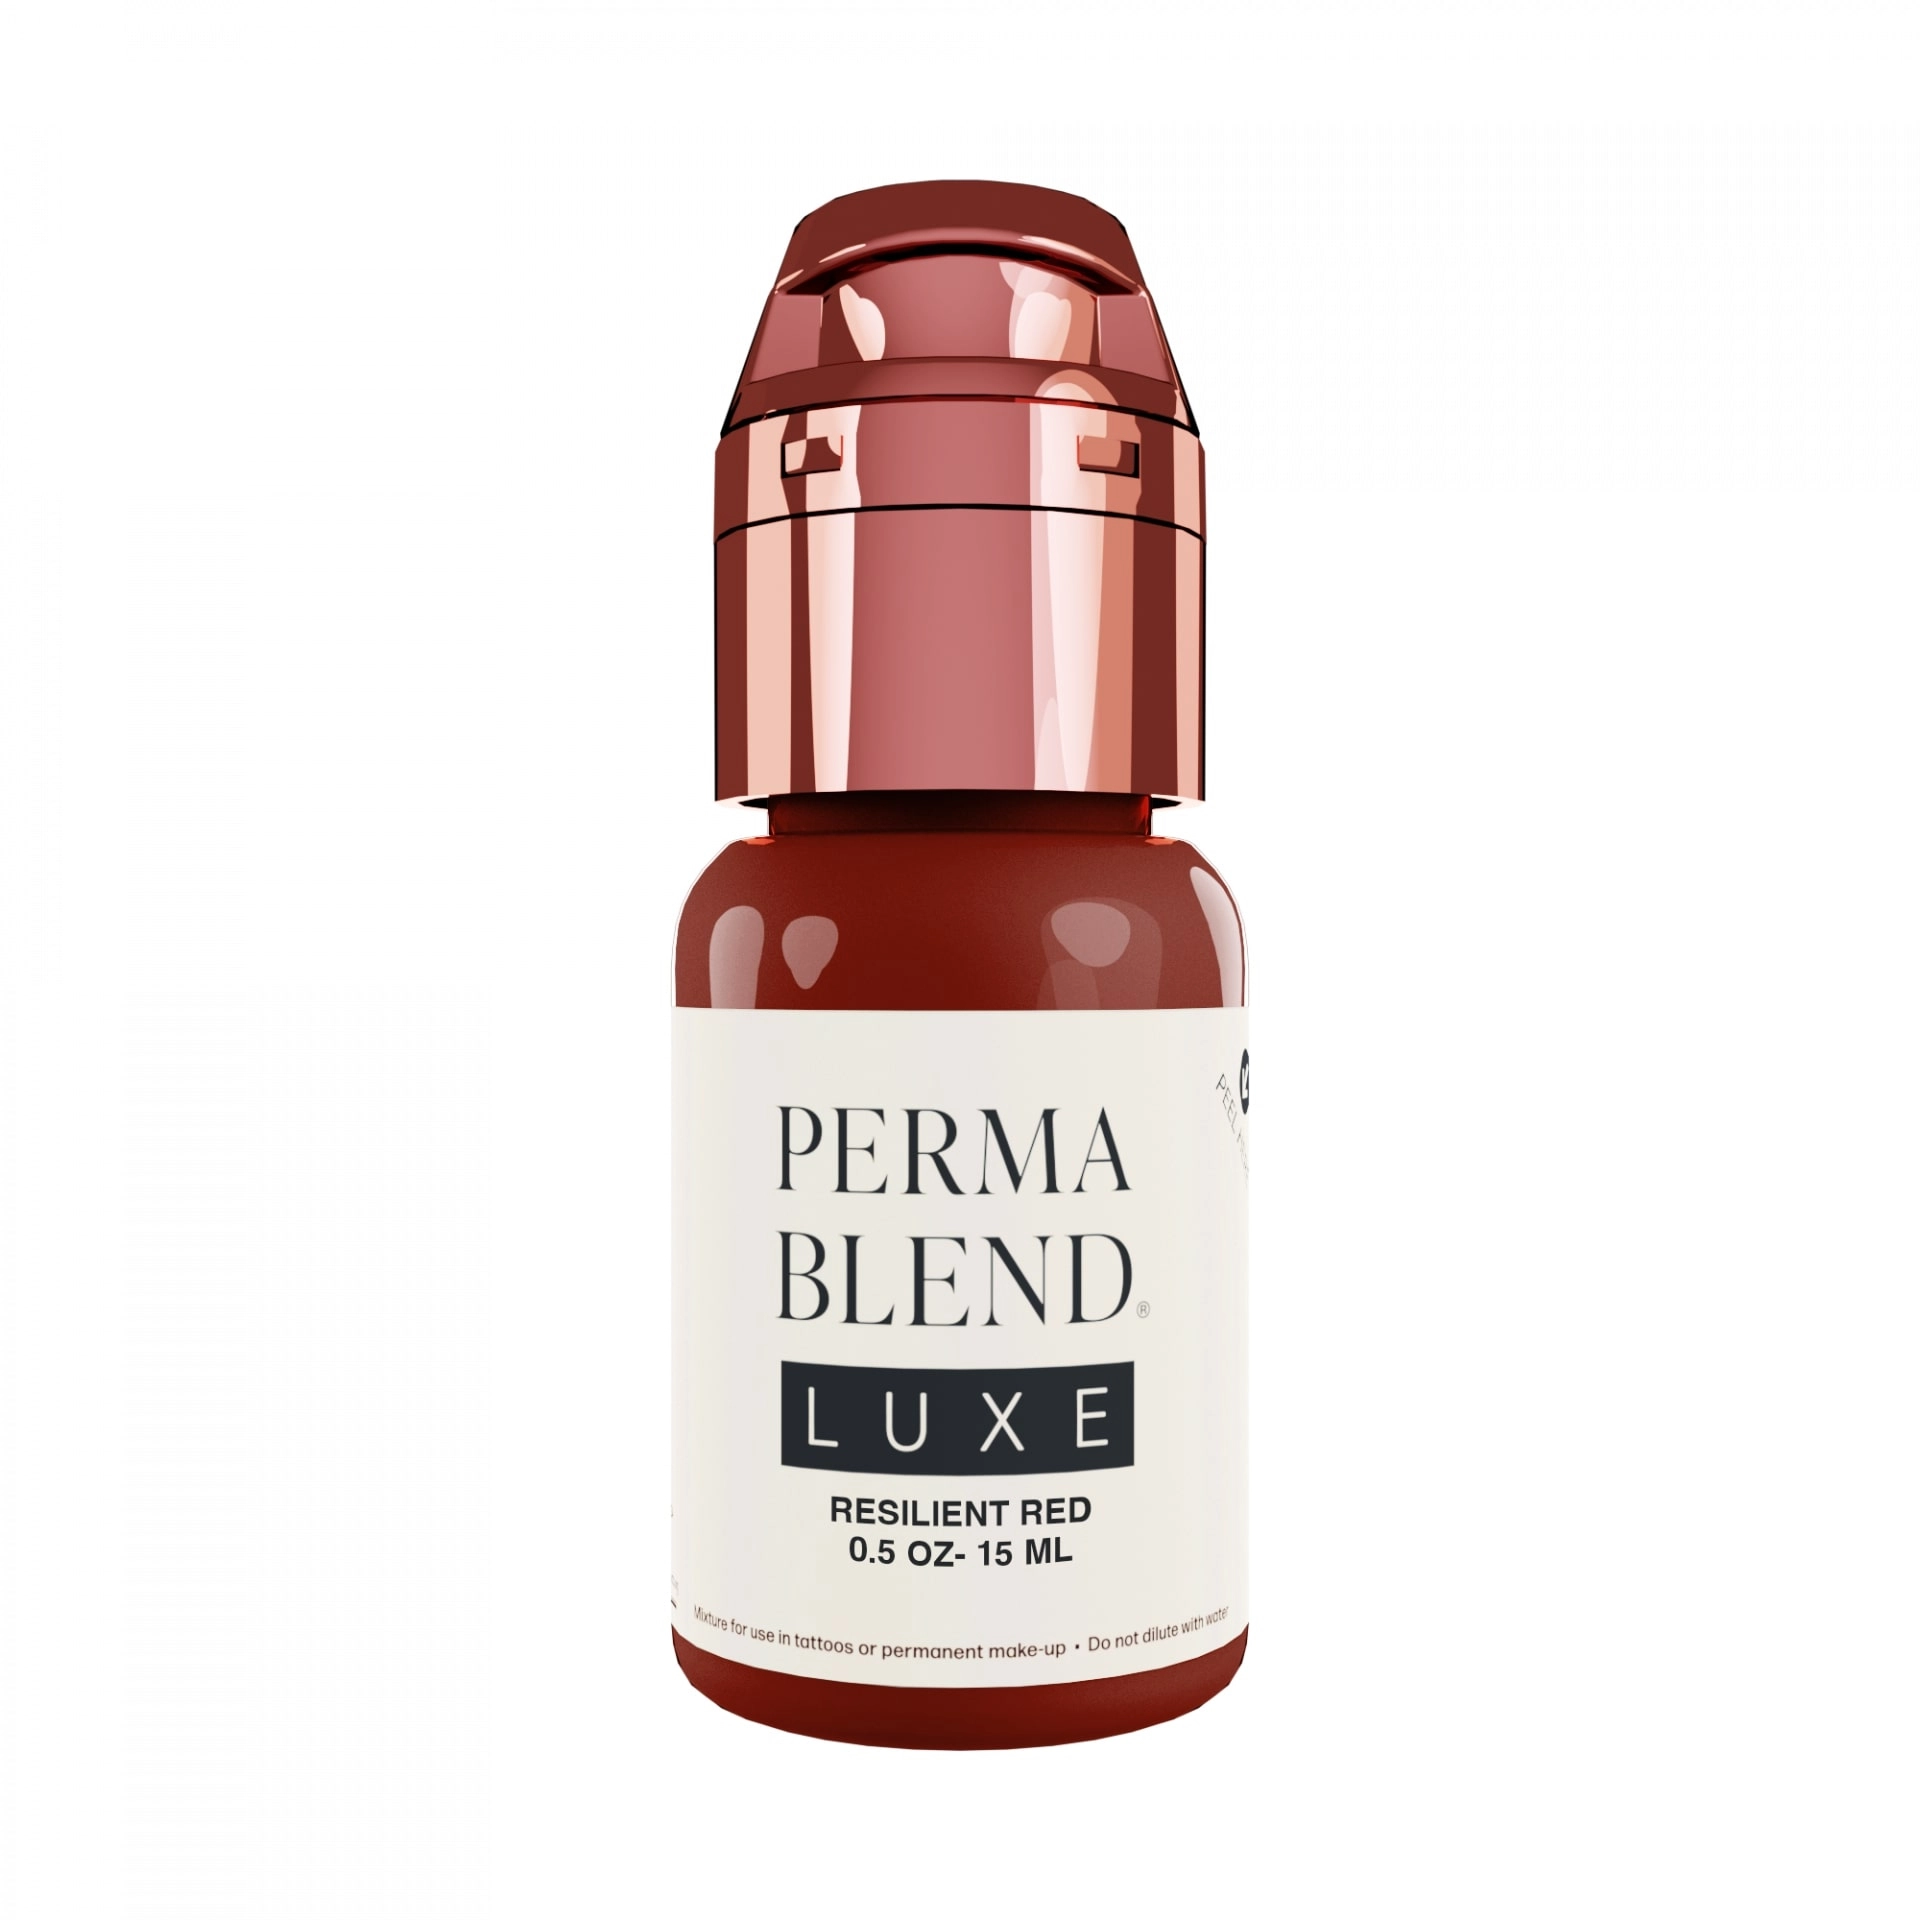 Perma Blend Luxe 15ml - Resilient Red